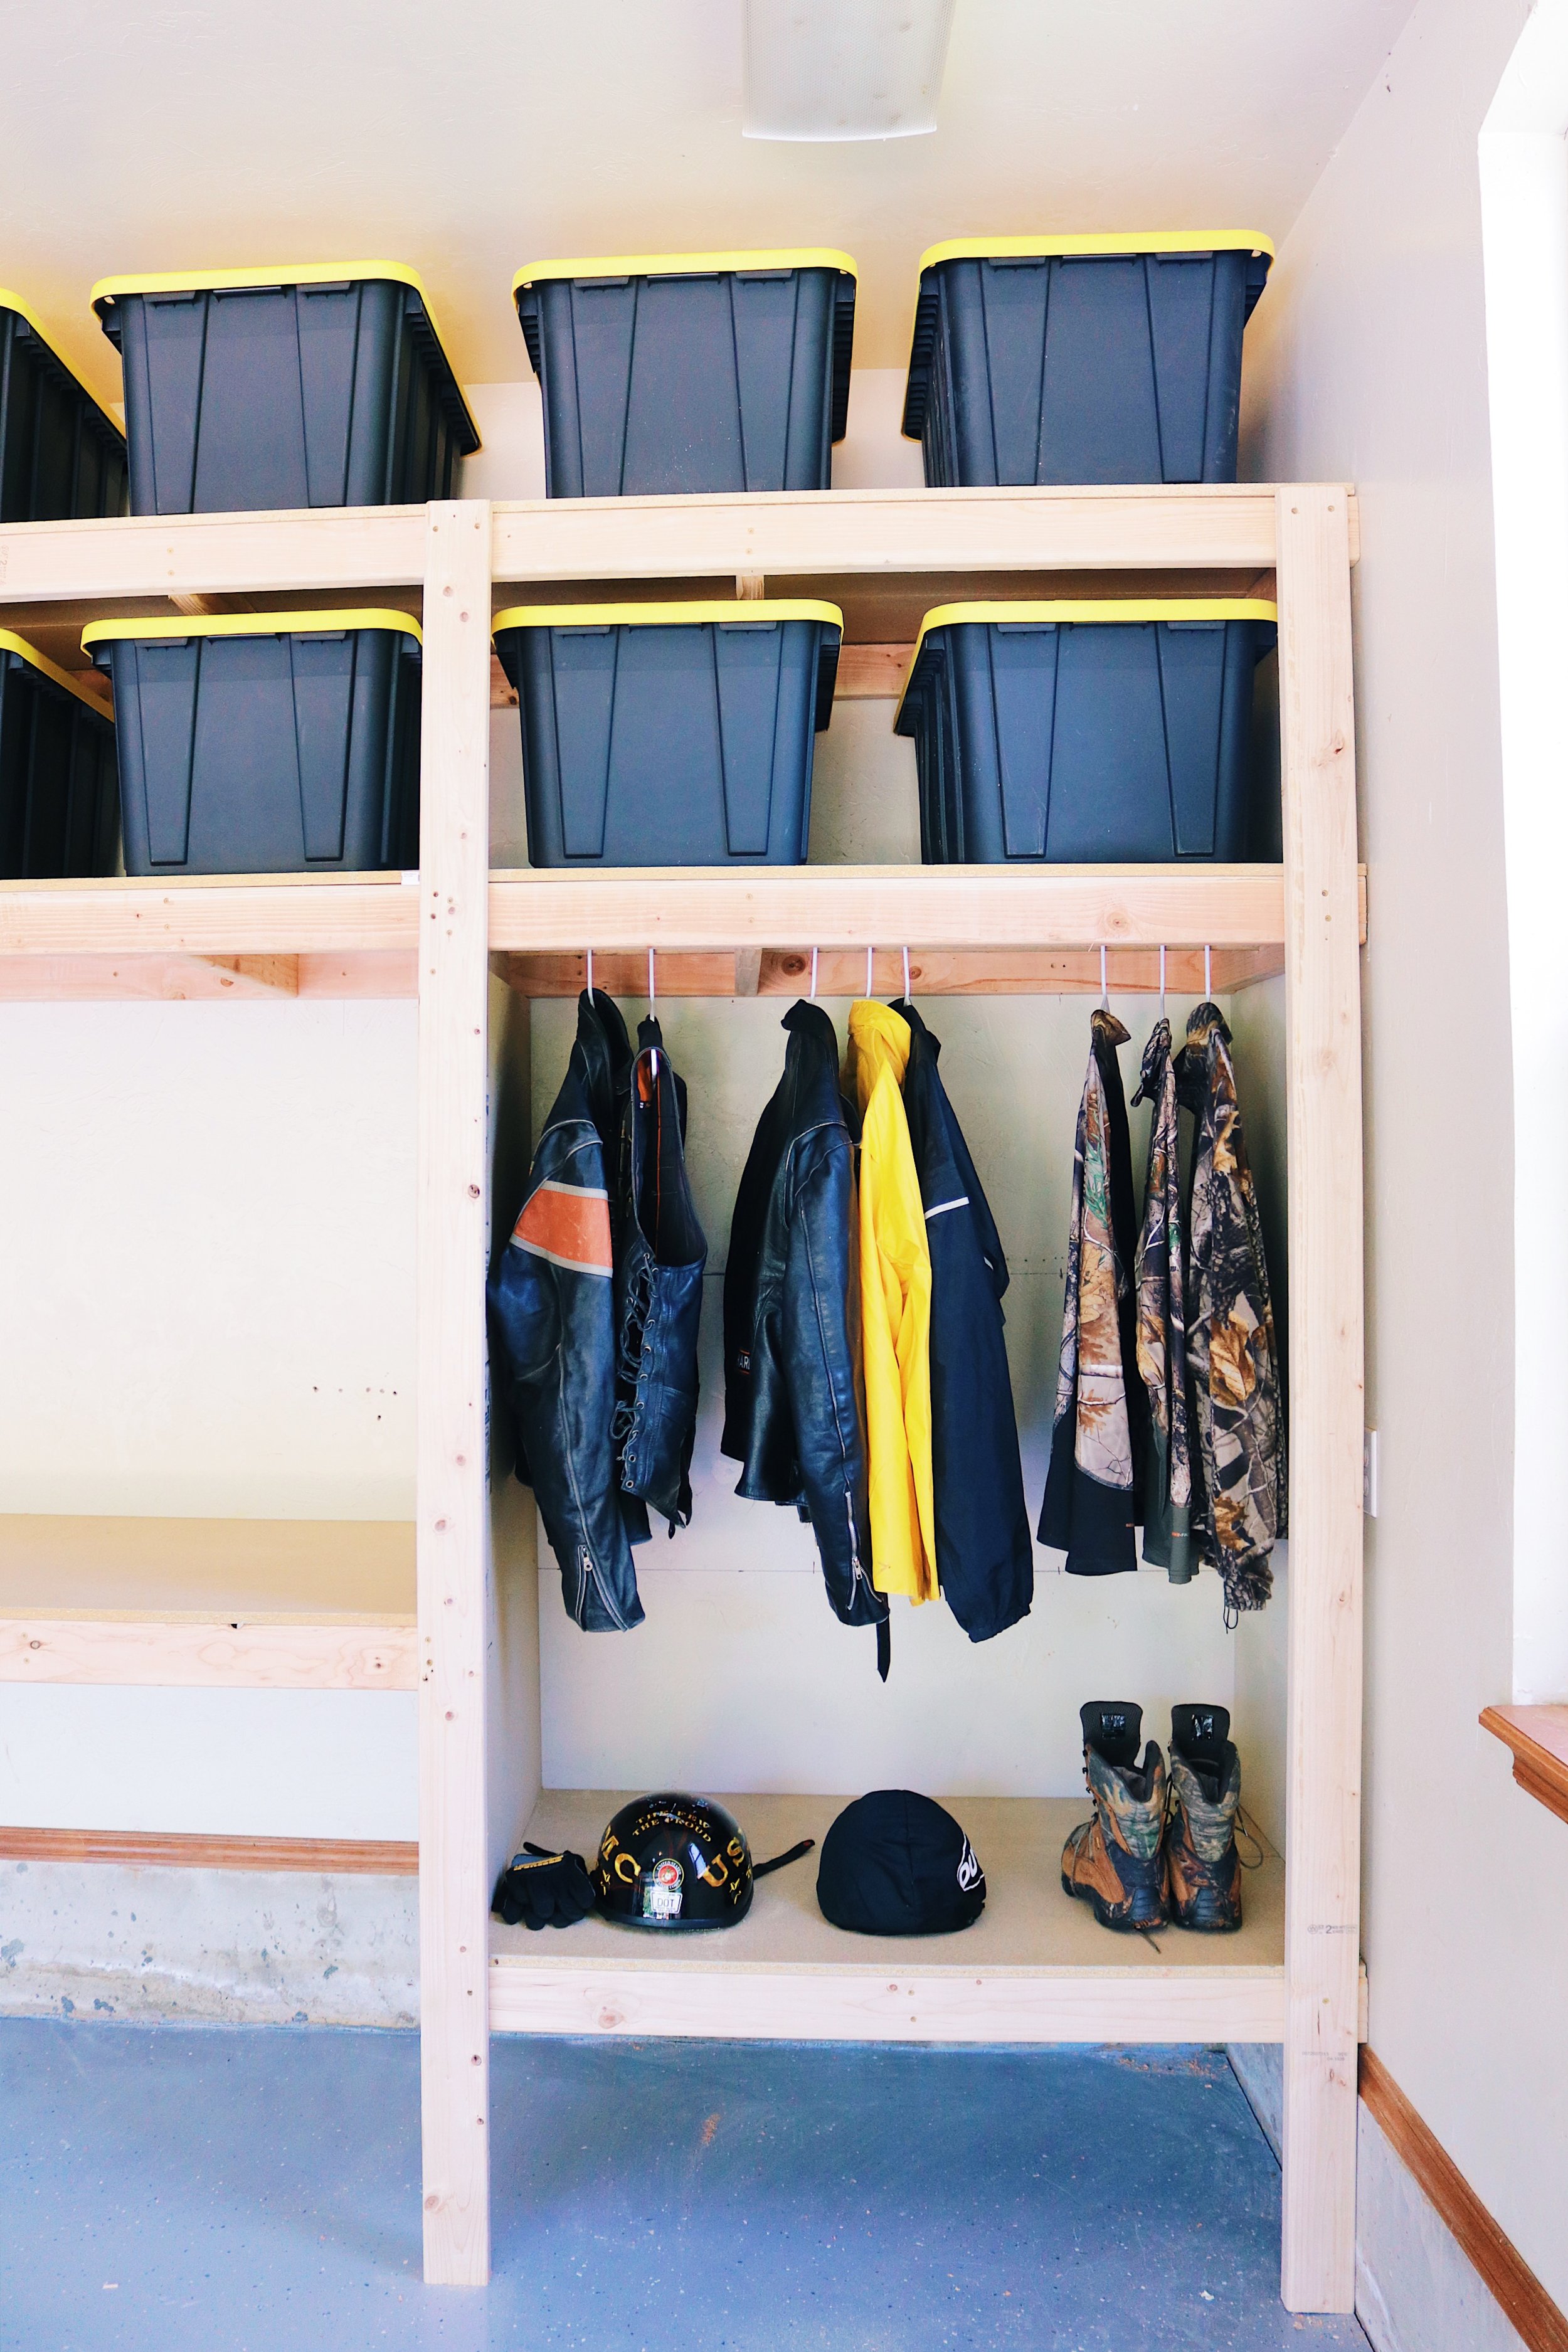 How to Build Oversized Garage Storage Cabinets